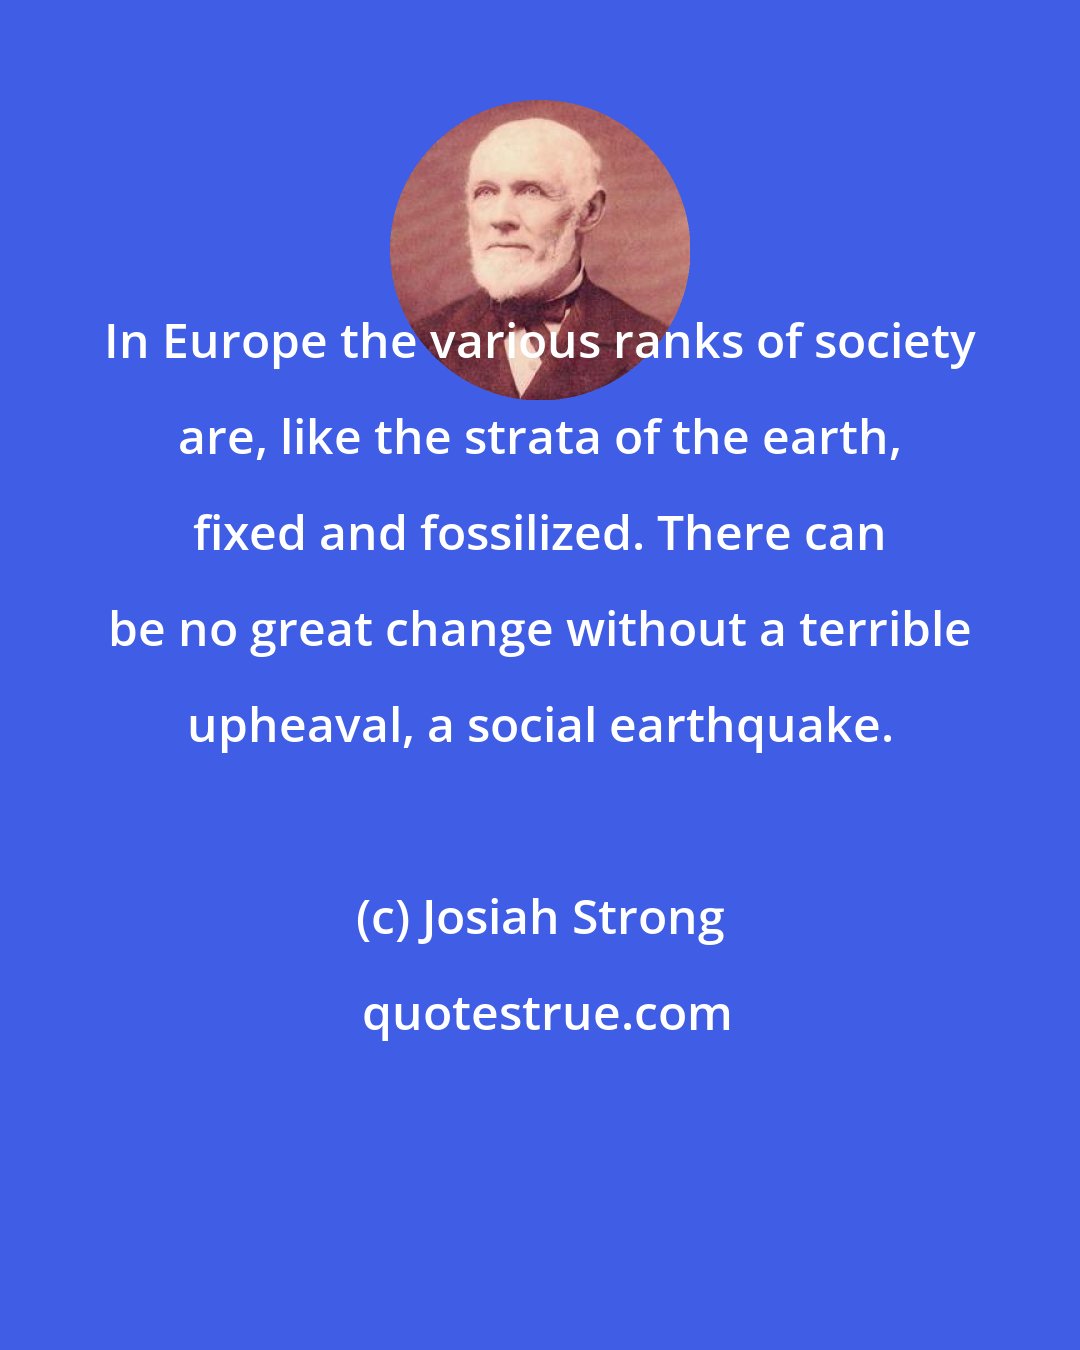 Josiah Strong: In Europe the various ranks of society are, like the strata of the earth, fixed and fossilized. There can be no great change without a terrible upheaval, a social earthquake.